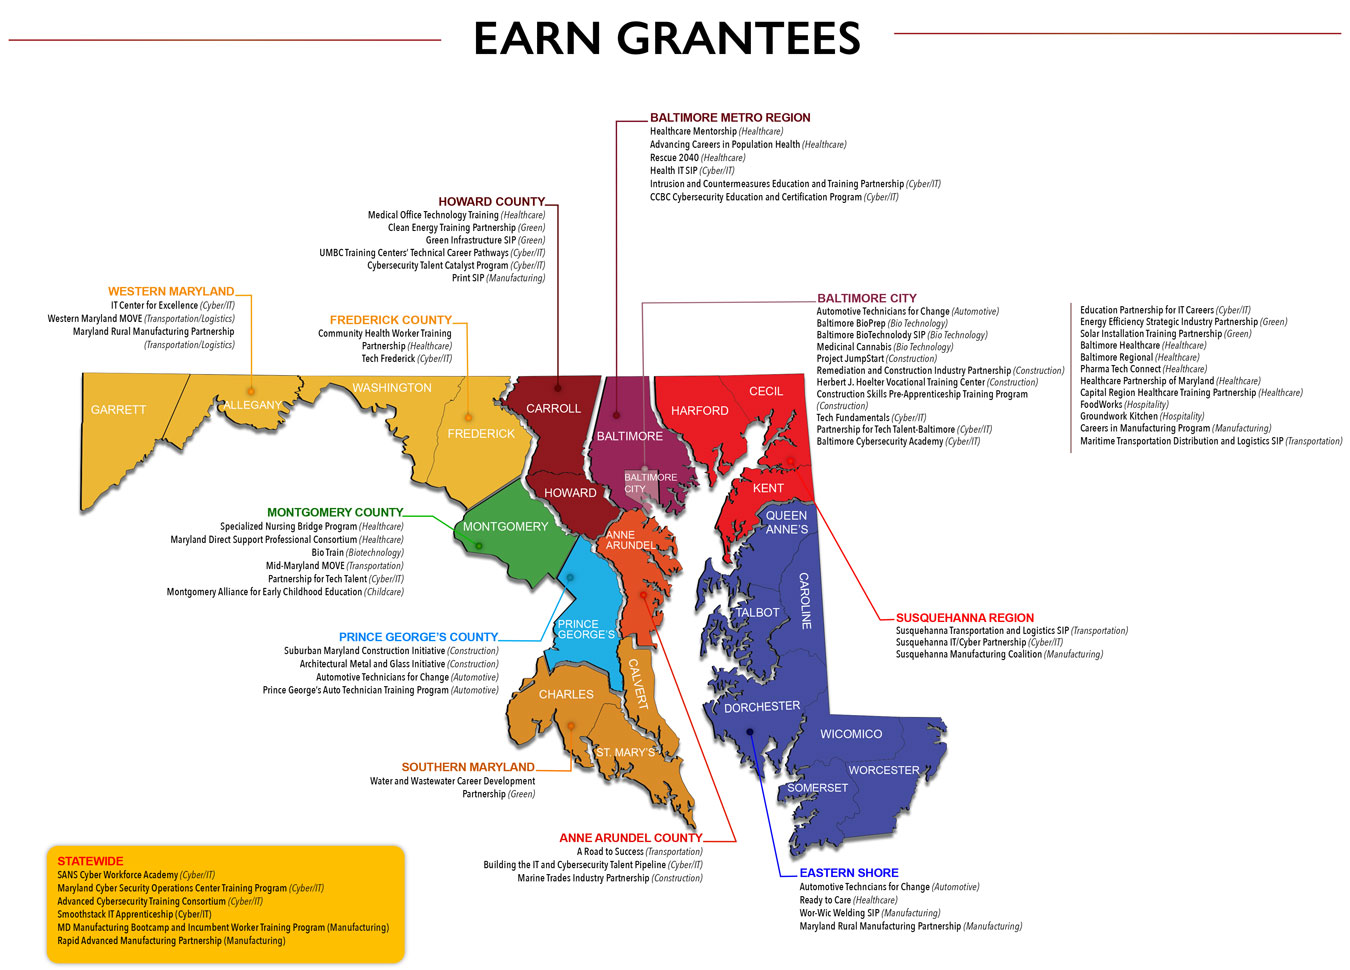 Map of EARN Maryland Implementation Grantee Partnerships